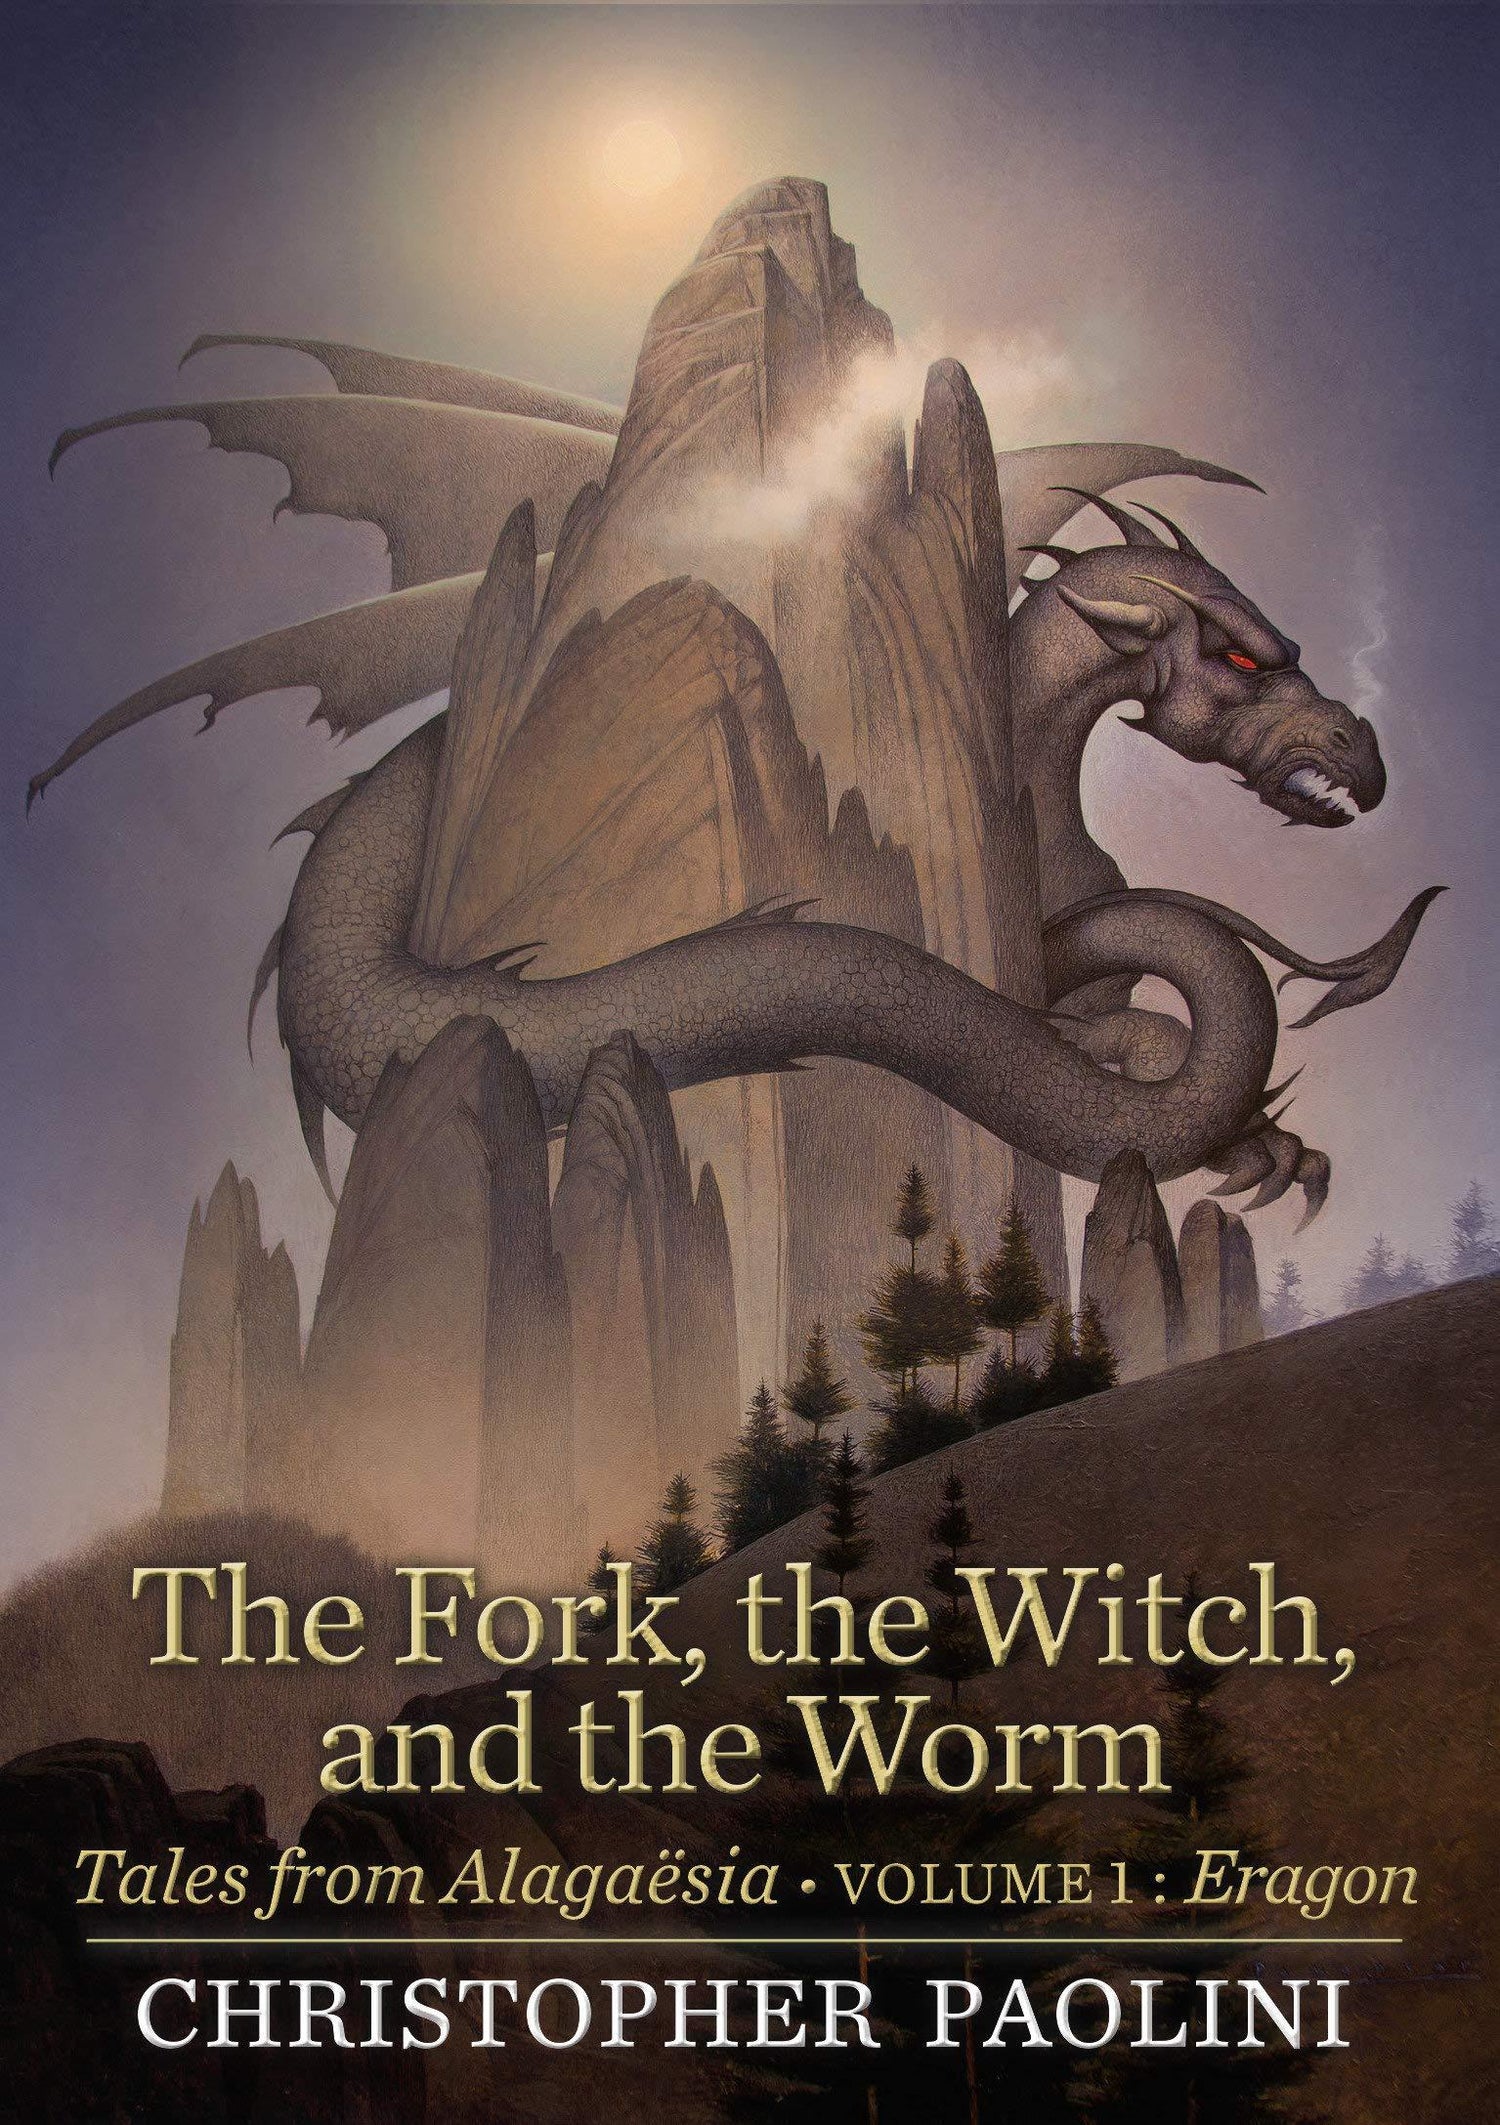 The Fork, the Witch, and the Worm: Tales from Alagaësia (Volume 1: Eragon) - D'Autores